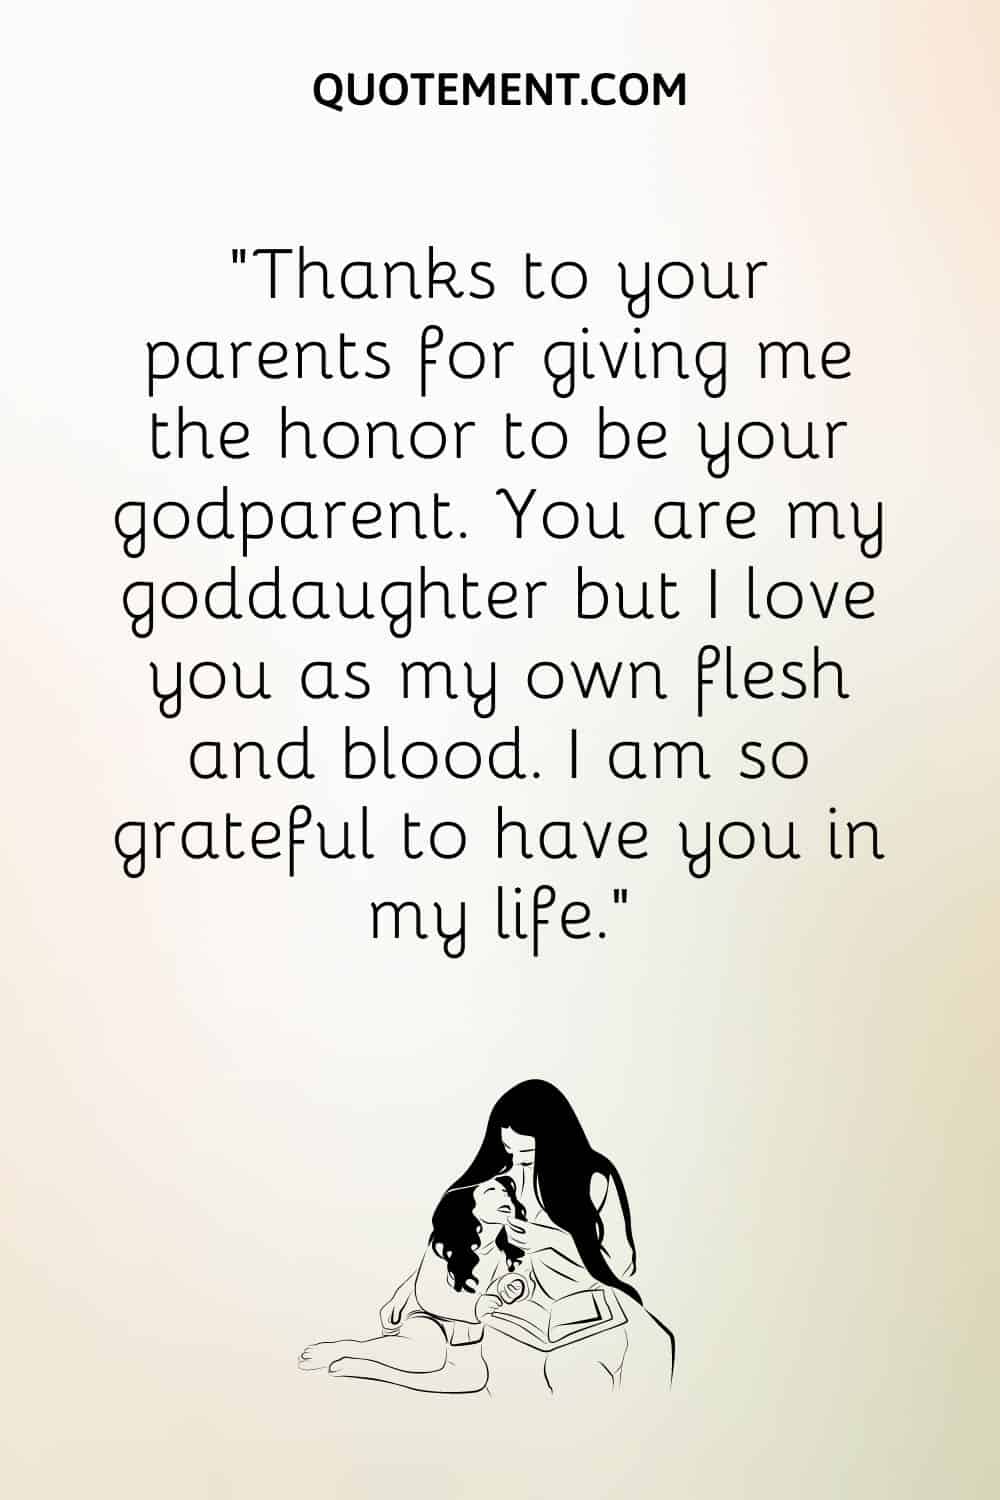 “Thanks to your parents for giving me the honor to be your godparent. You are my goddaughter but I love you as my own flesh and blood. I am so grateful to have you in my life.”